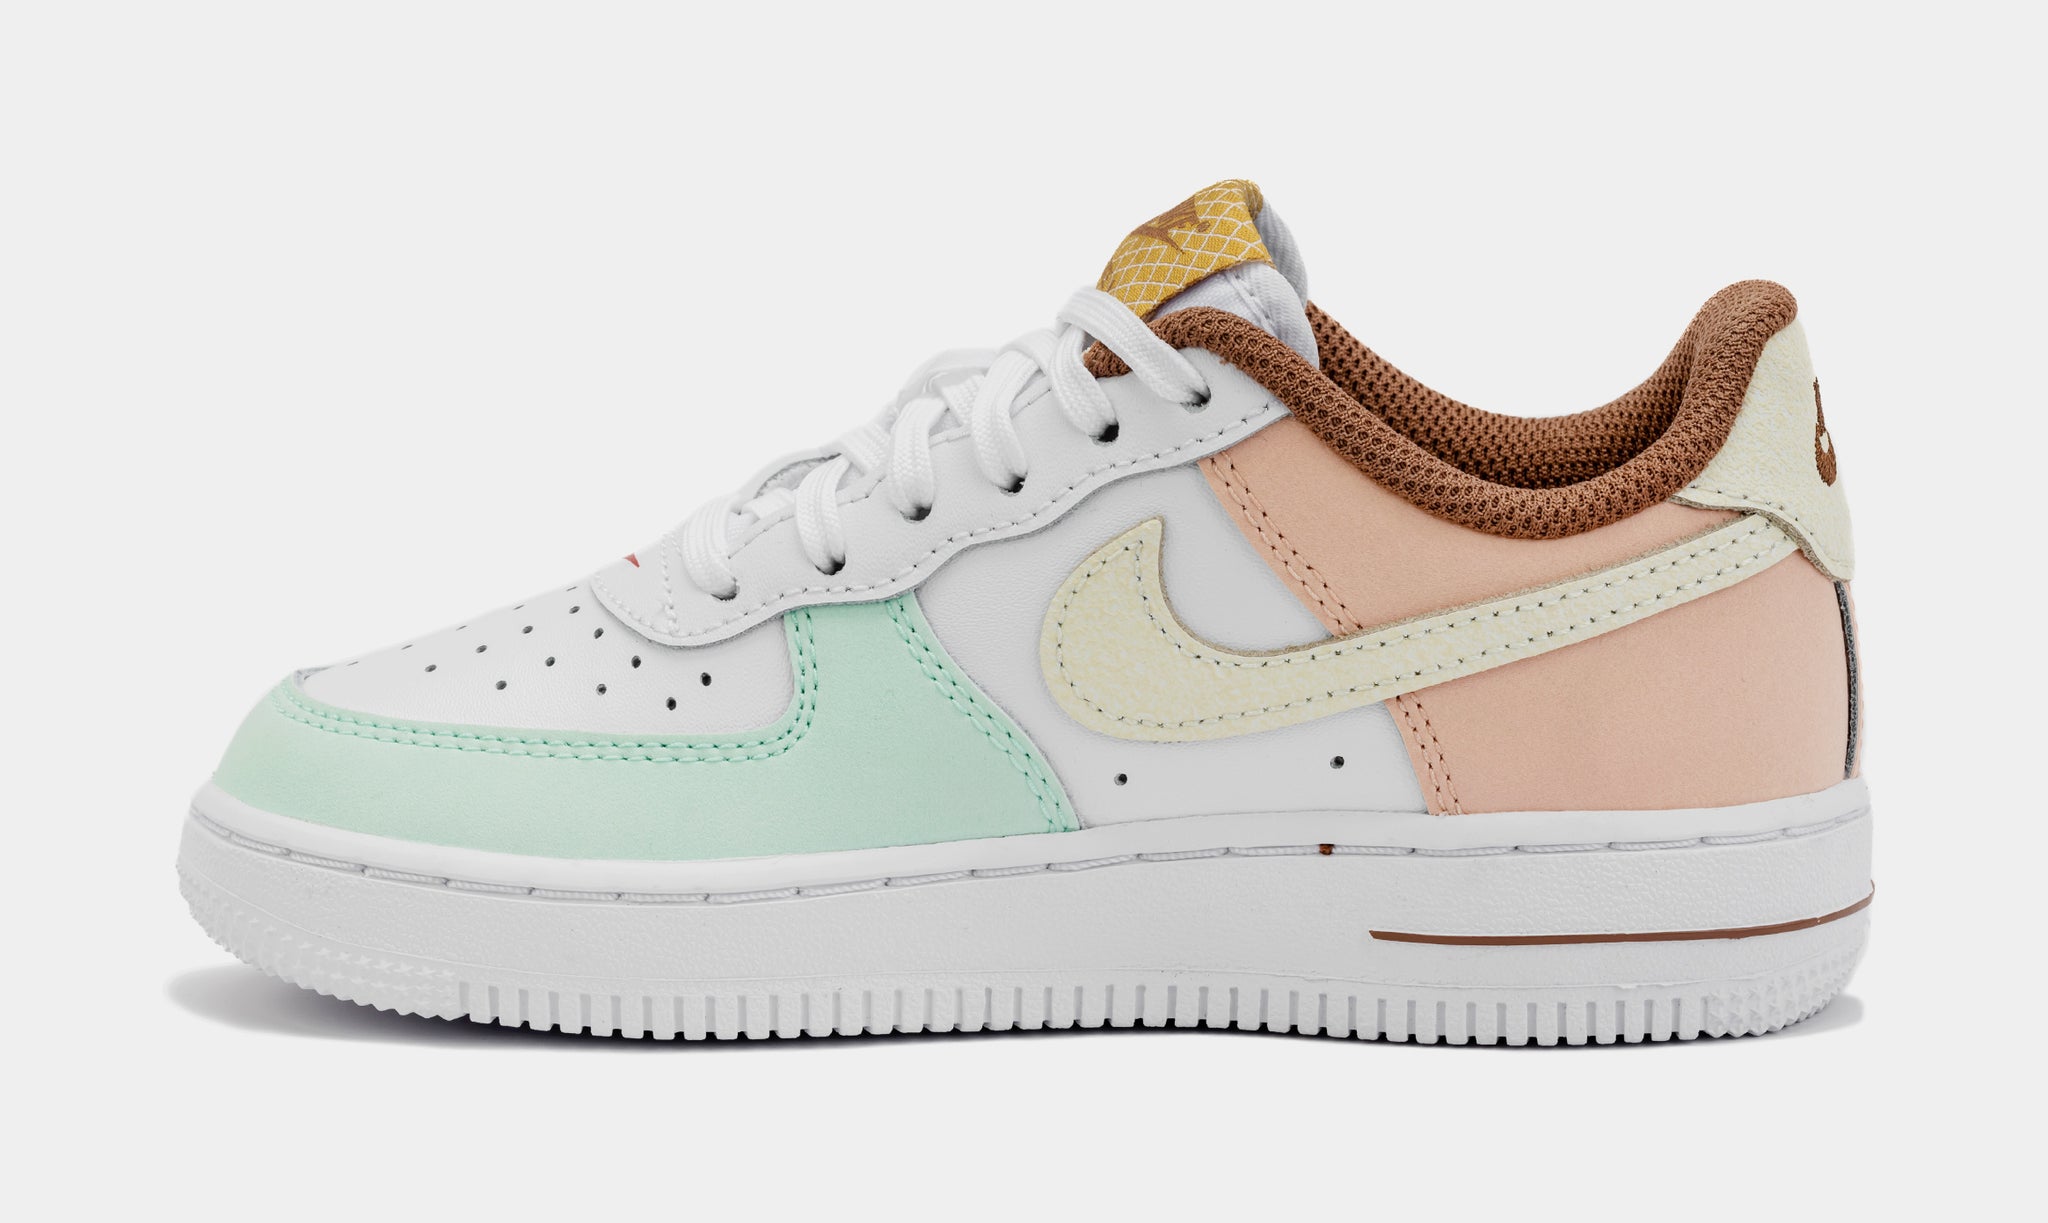 grade school air force 1s lv8 shoes